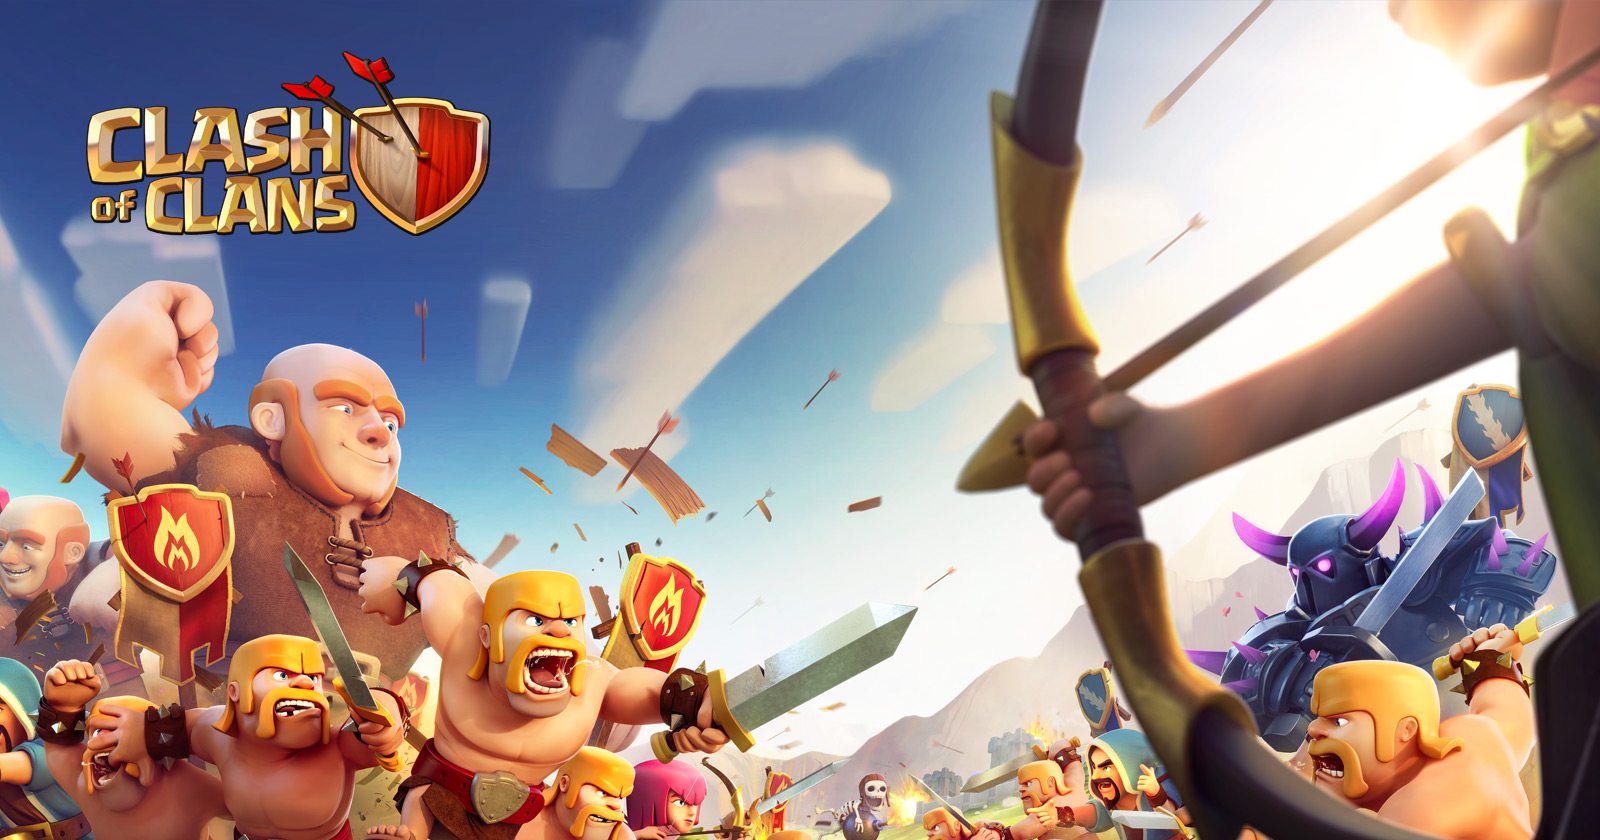 Clash of Clans September update